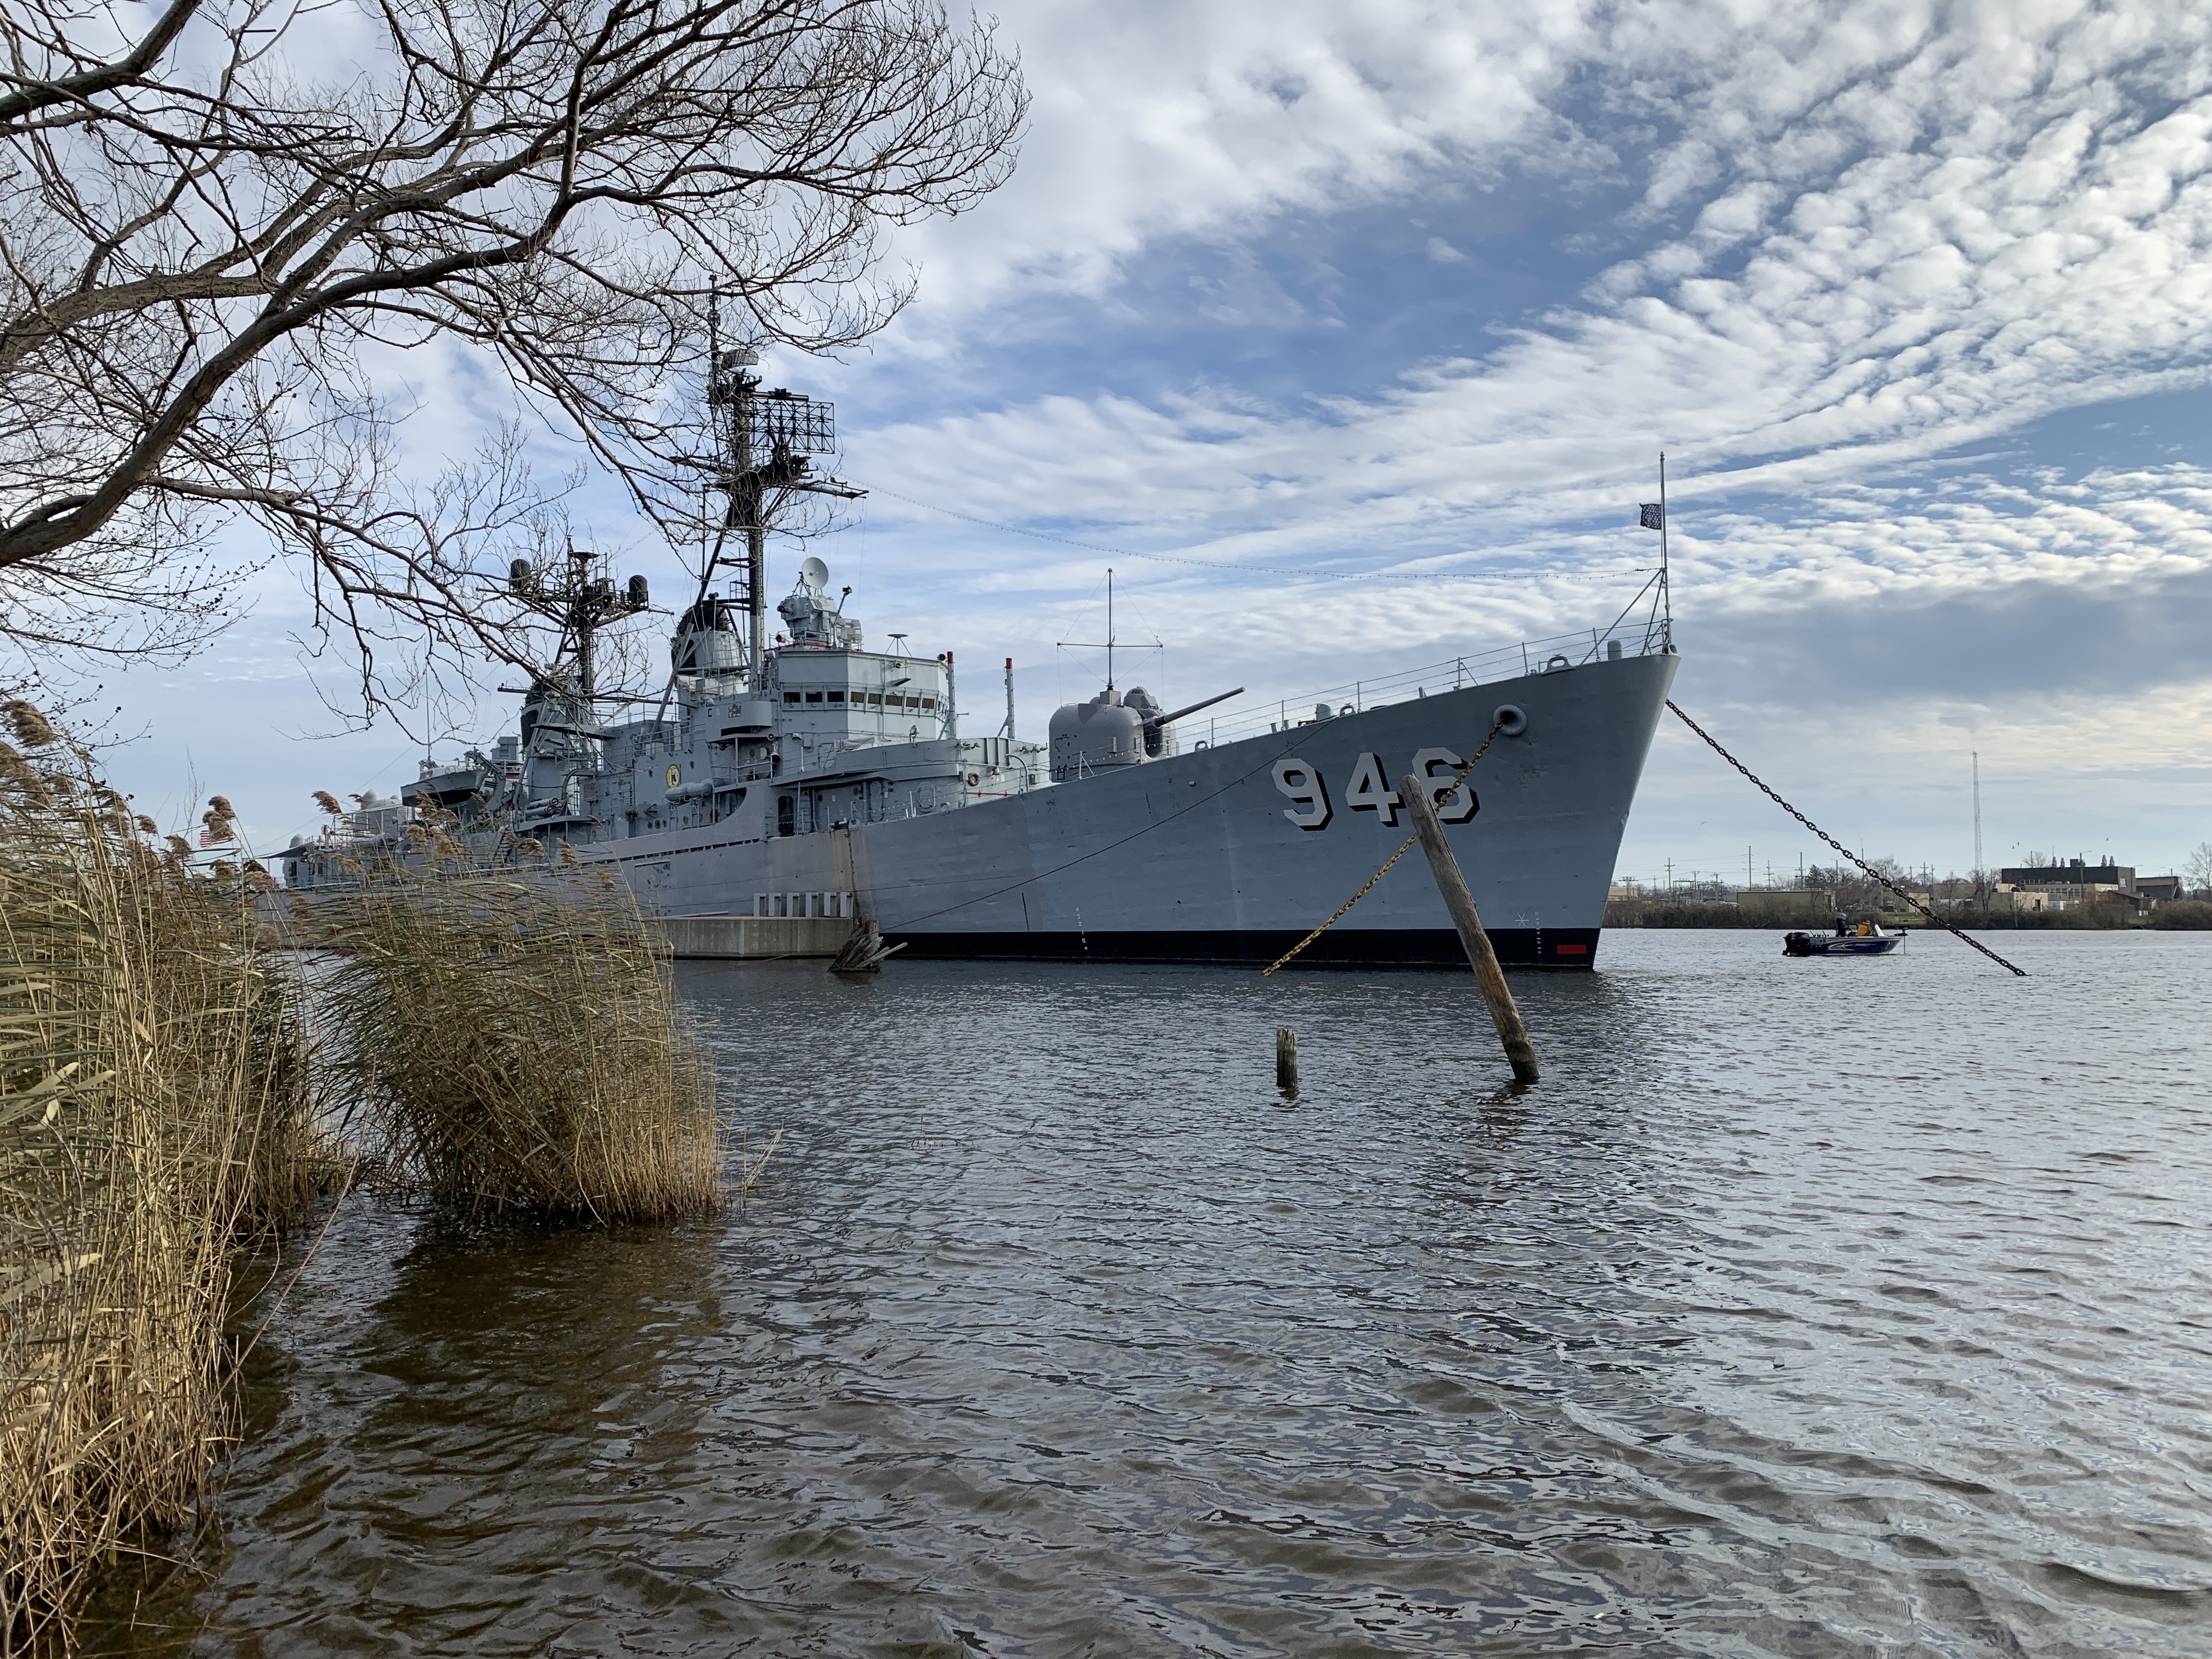 Bow view of destroyer Edson taken from the shore, a grey ship with number 946 on the bow in the Saginaw River with a marsh and tree to the left.